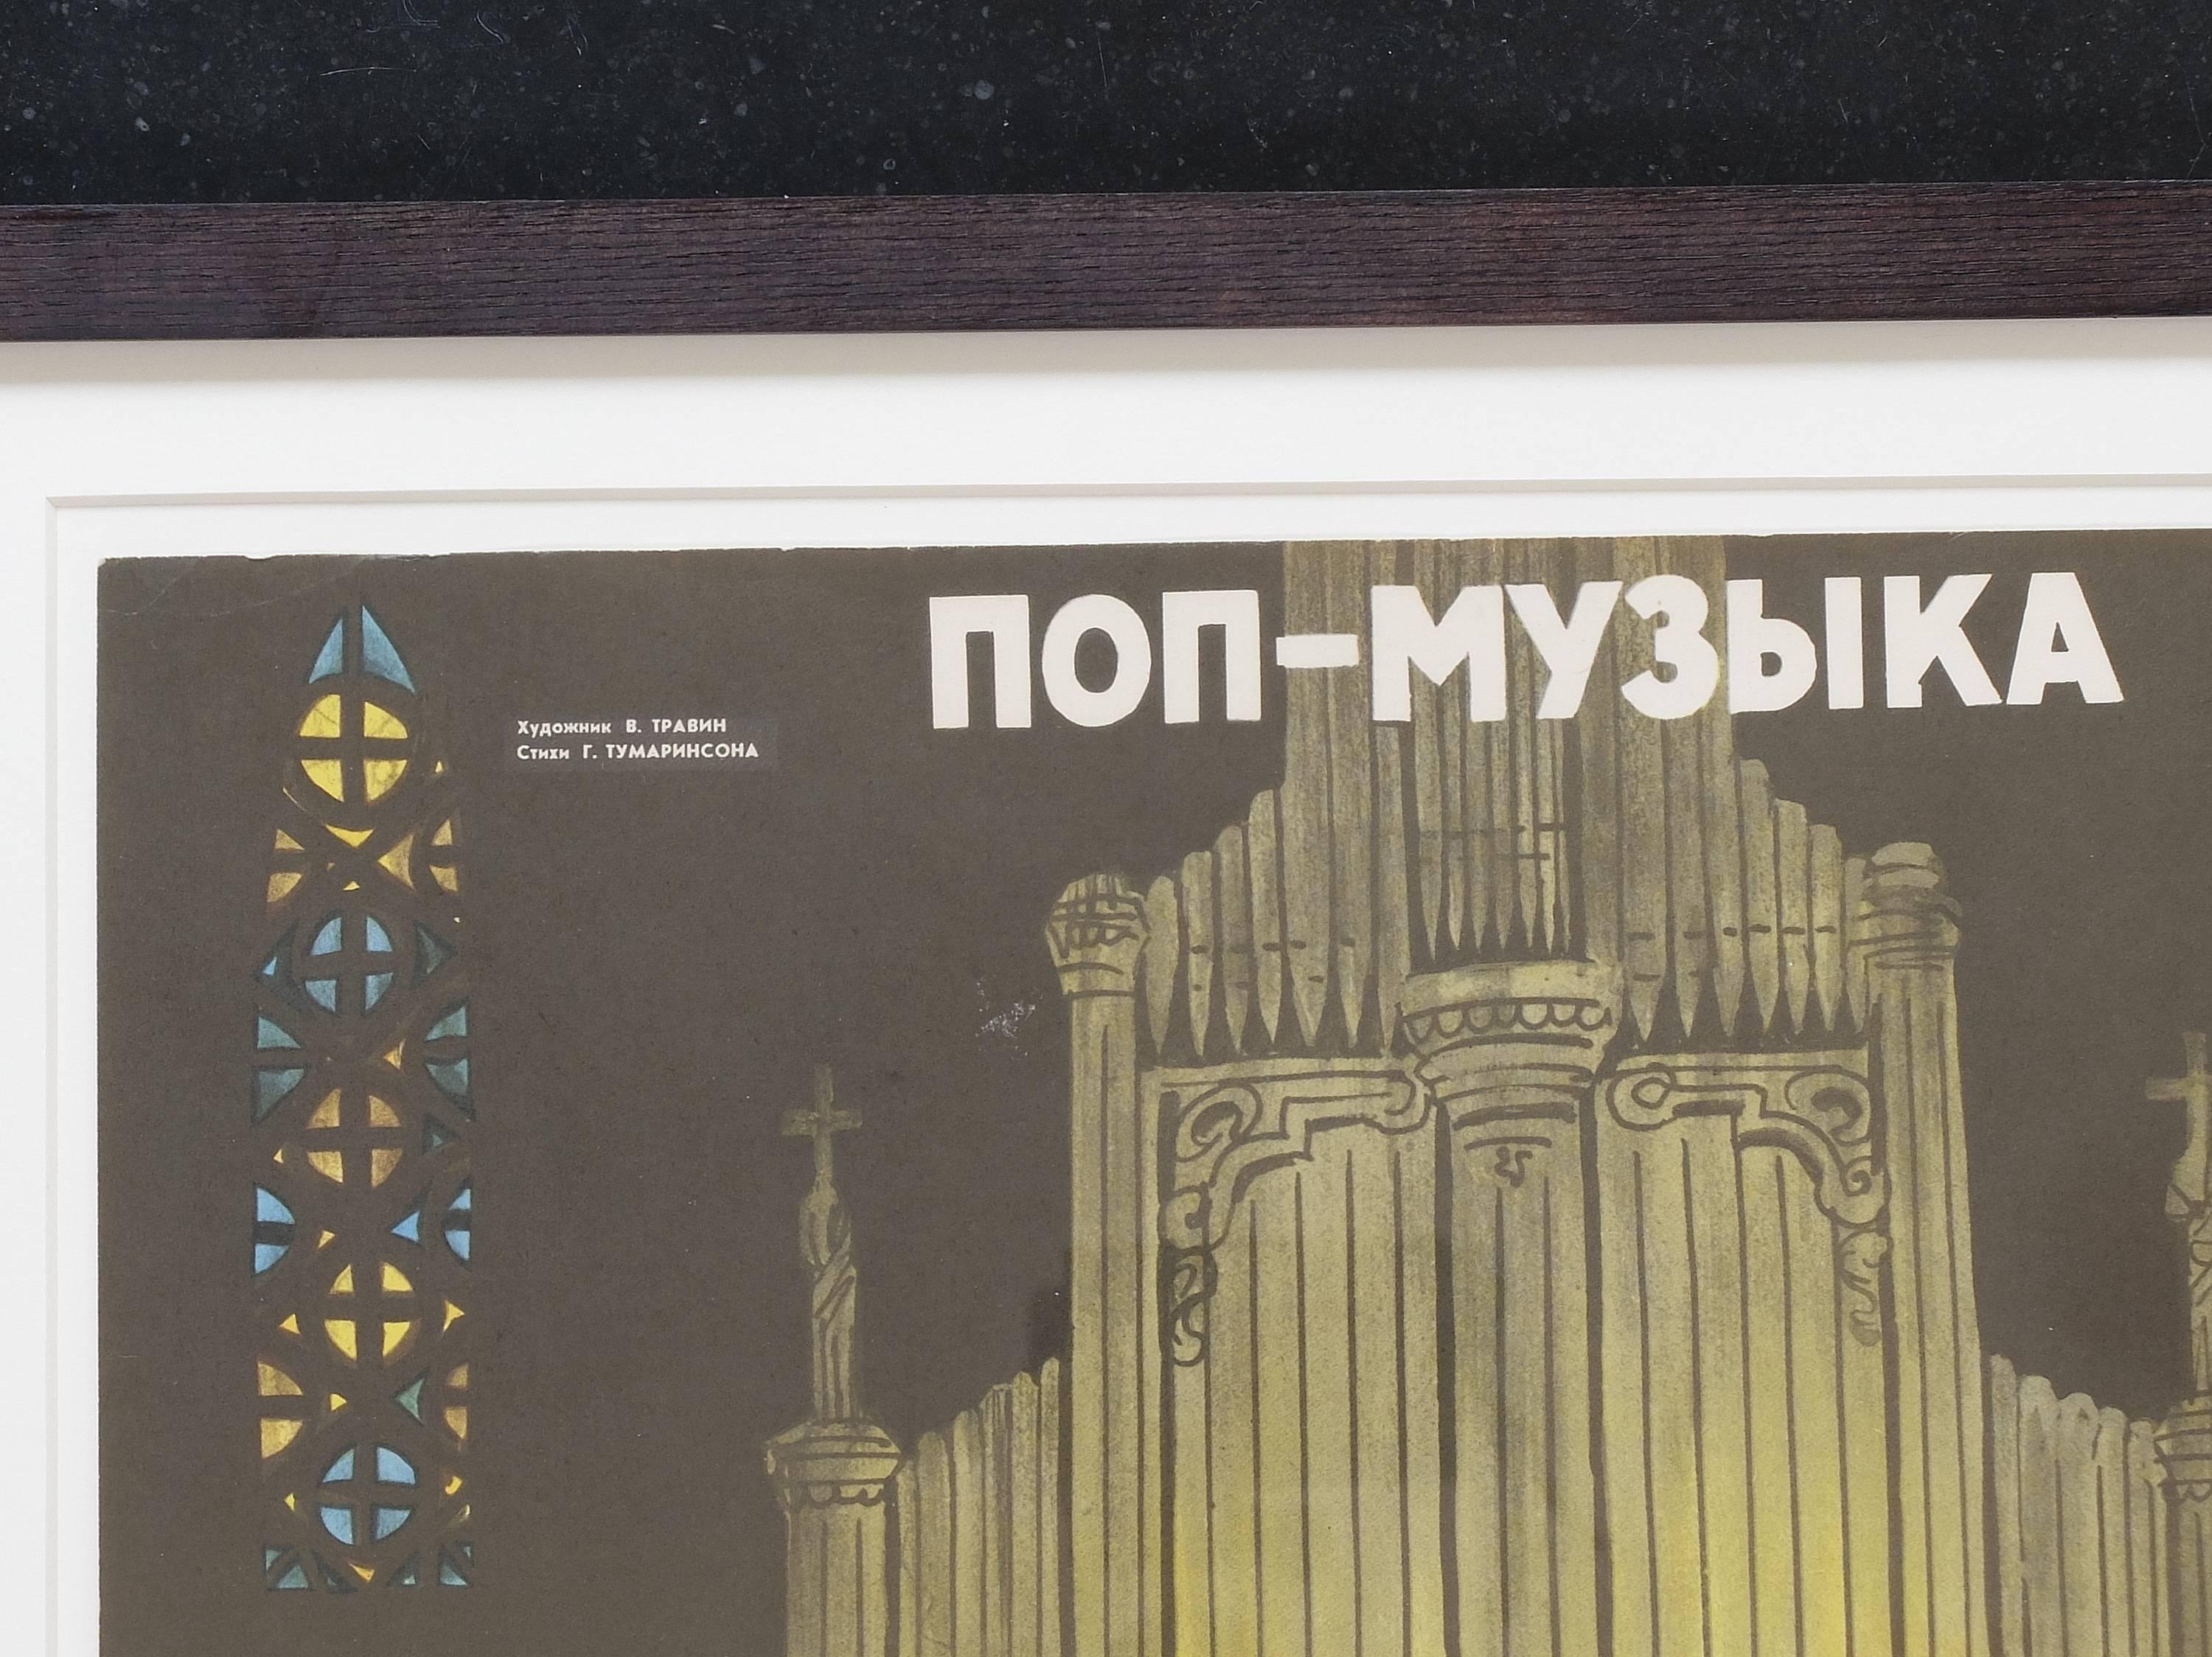 An original Soviet era political poster, one of a collection by the group of artists known as Boevoi Karandash (fighting pencil), dated 1975 that deal with the theme of religion. A bold graphic image of the period with lots of printed information.